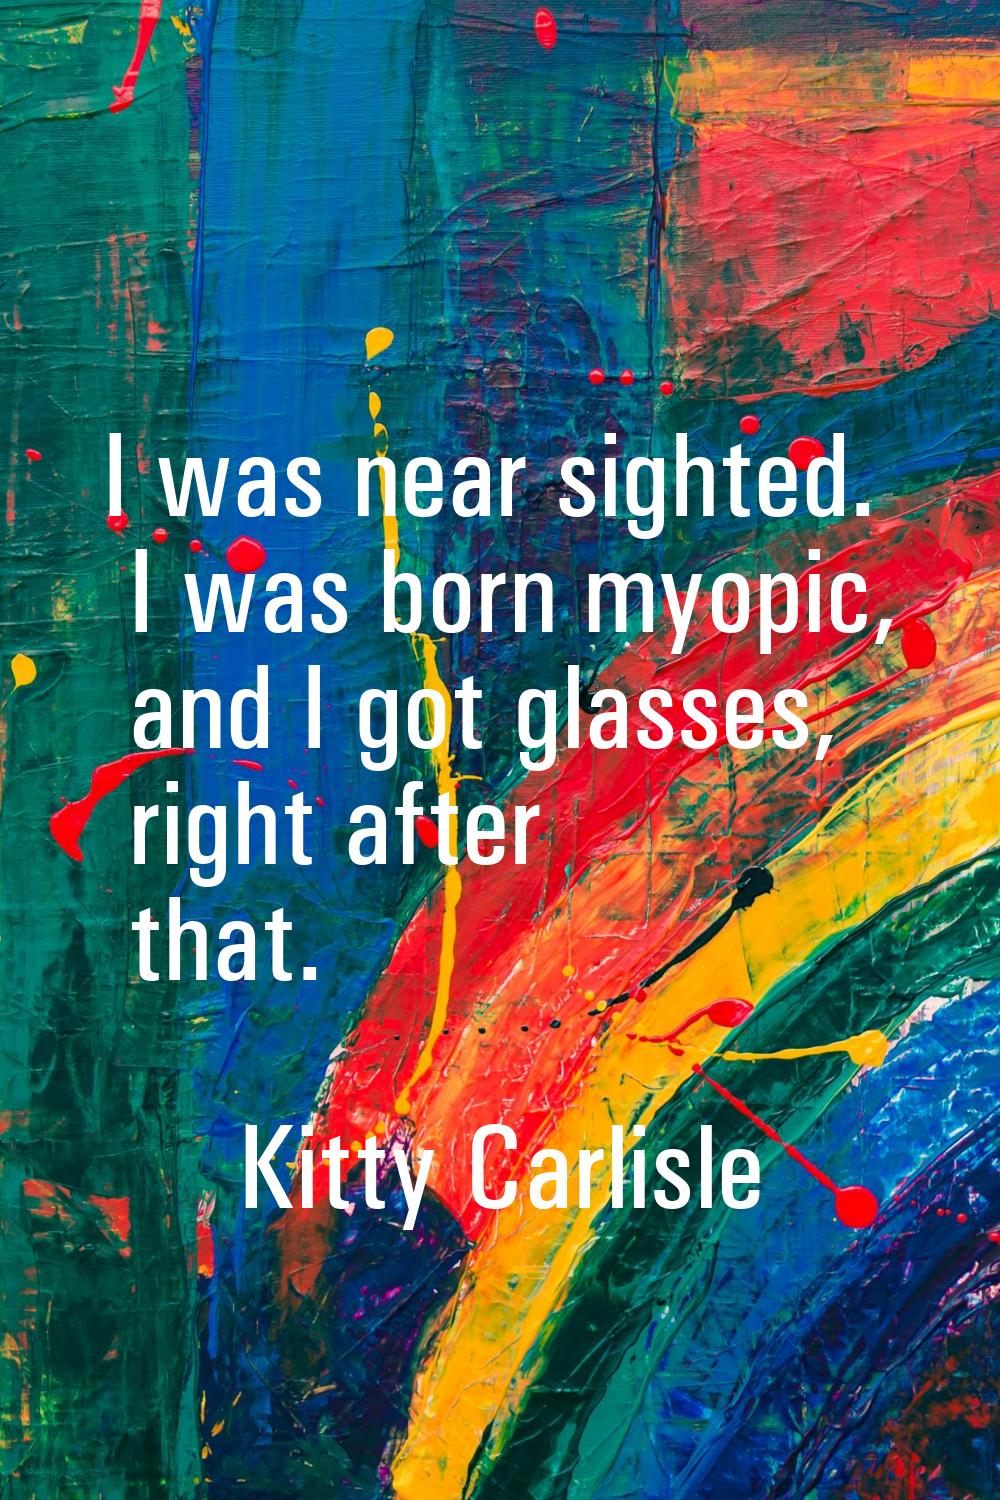 I was near sighted. I was born myopic, and I got glasses, right after that.